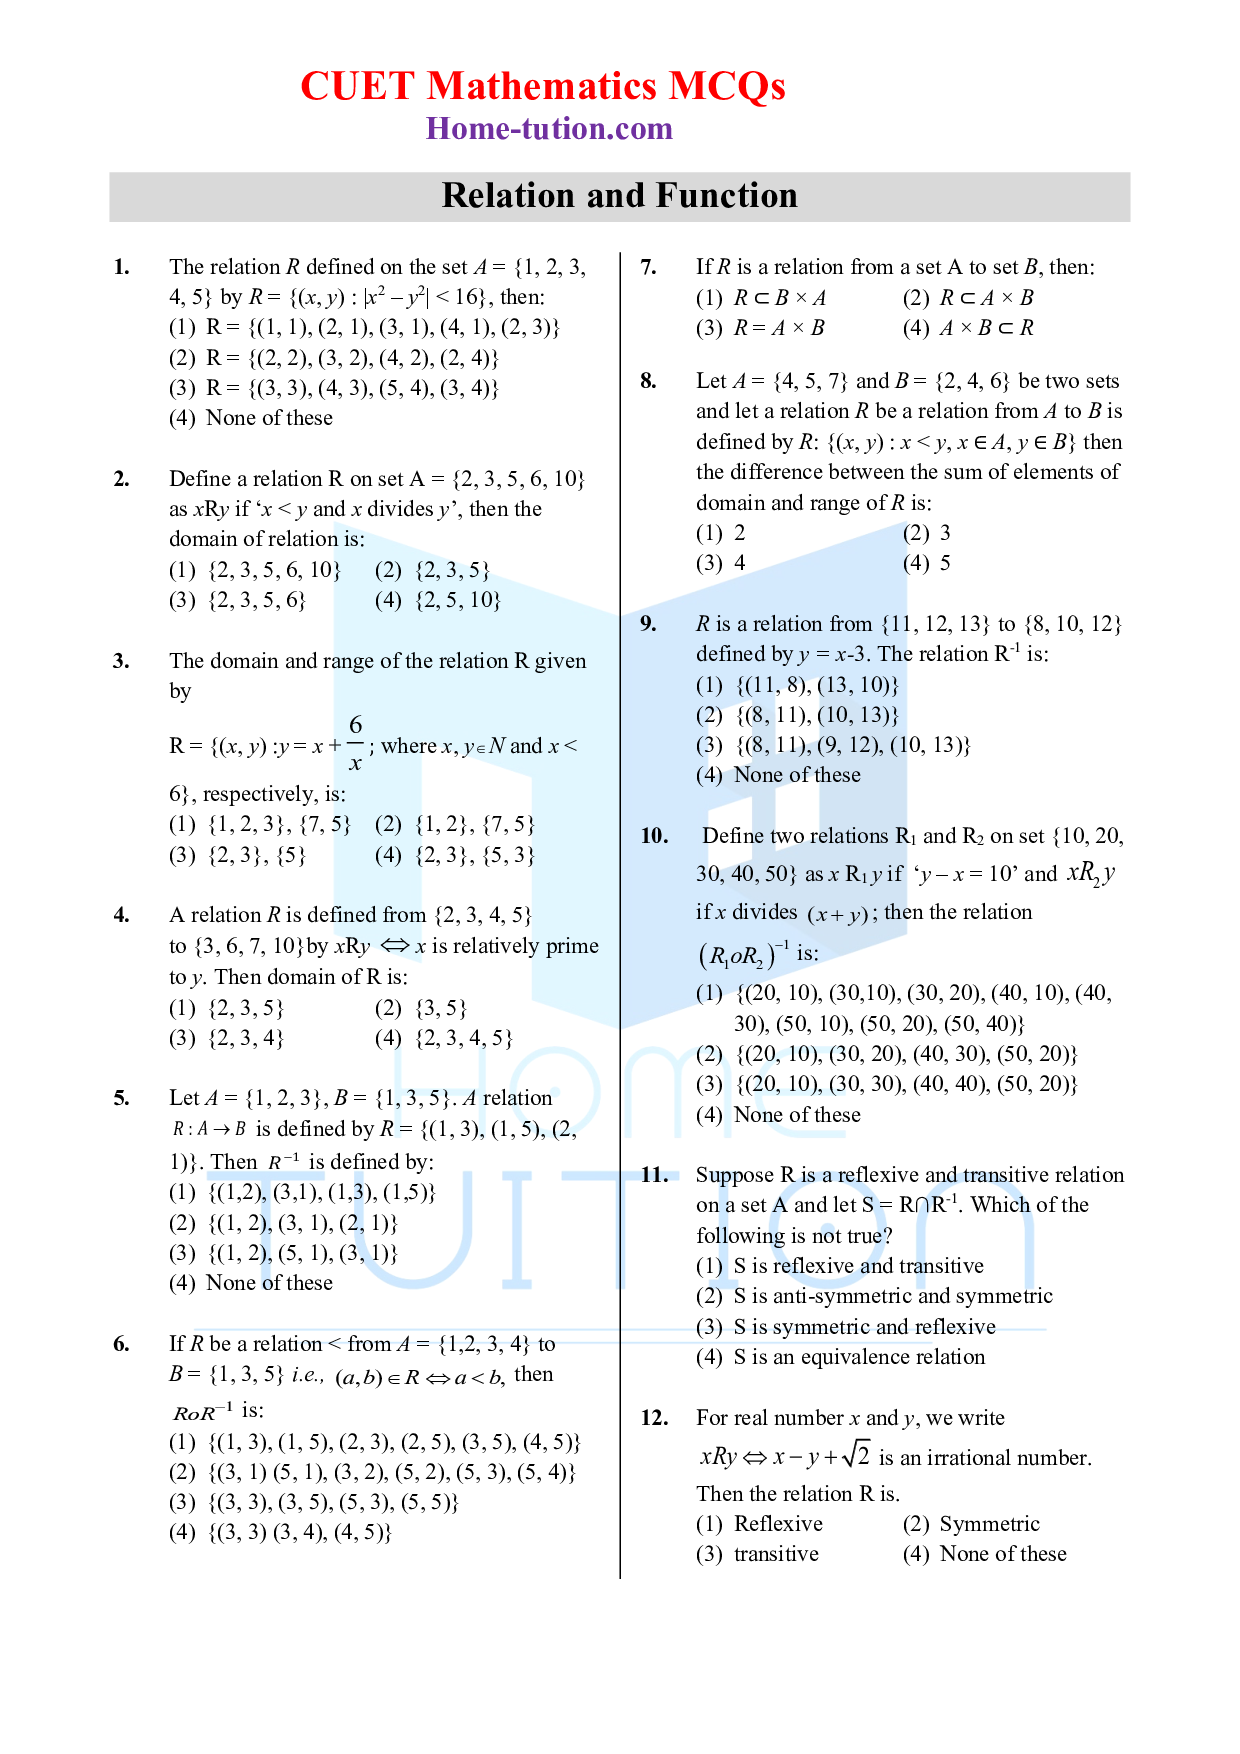 CUET MCQ Questions For Maths Chapter-13 Relation and Function